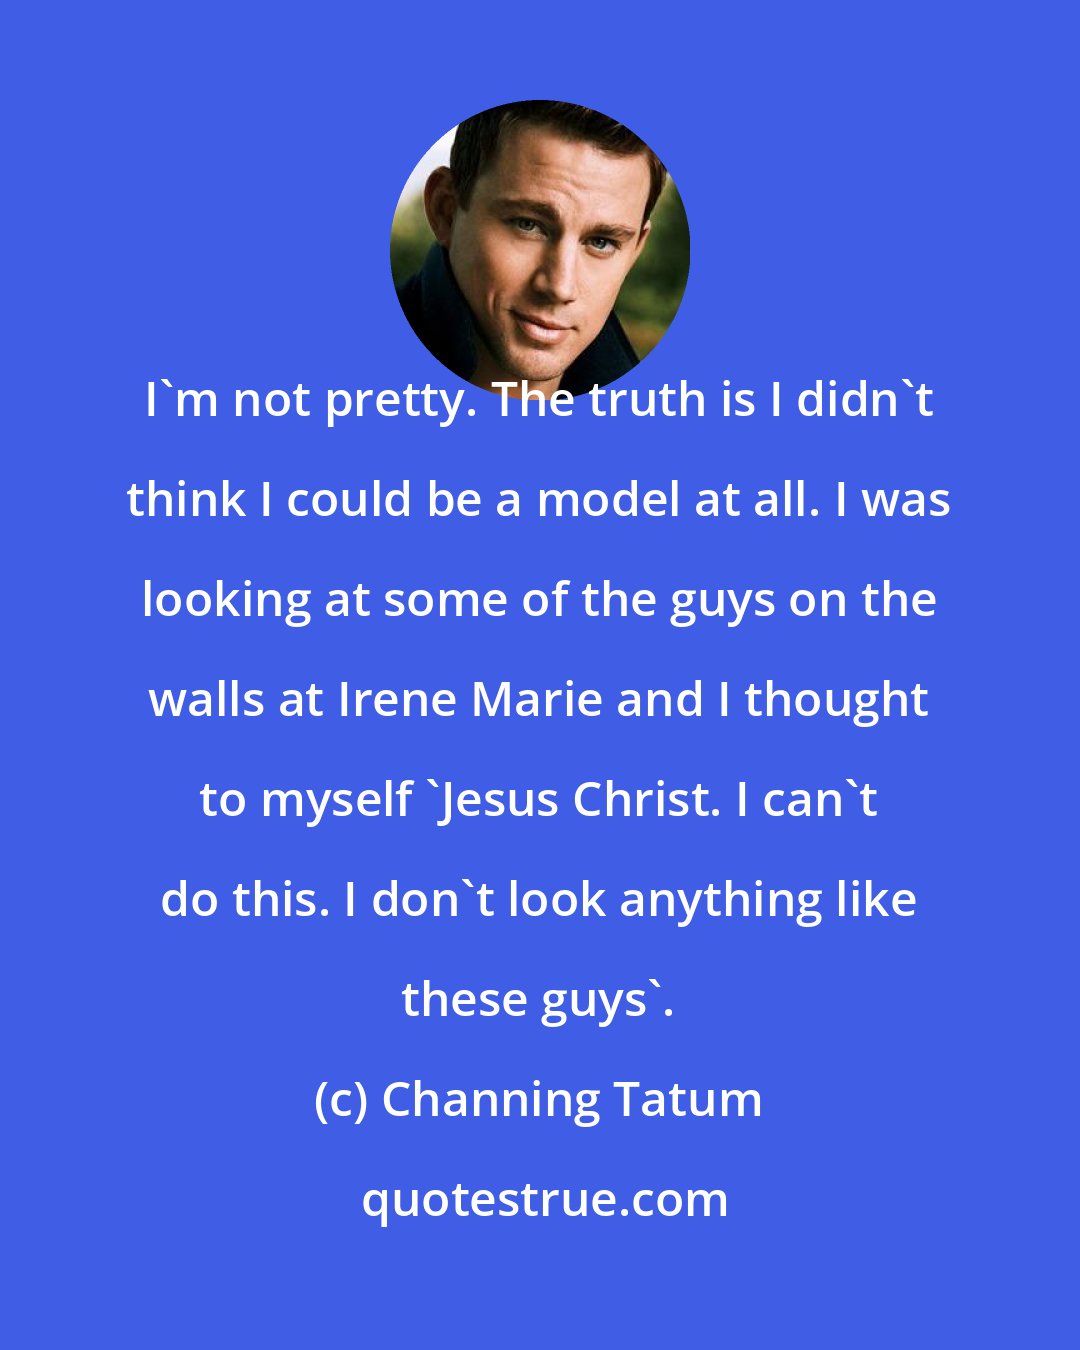 Channing Tatum: I'm not pretty. The truth is I didn't think I could be a model at all. I was looking at some of the guys on the walls at Irene Marie and I thought to myself 'Jesus Christ. I can't do this. I don't look anything like these guys'.